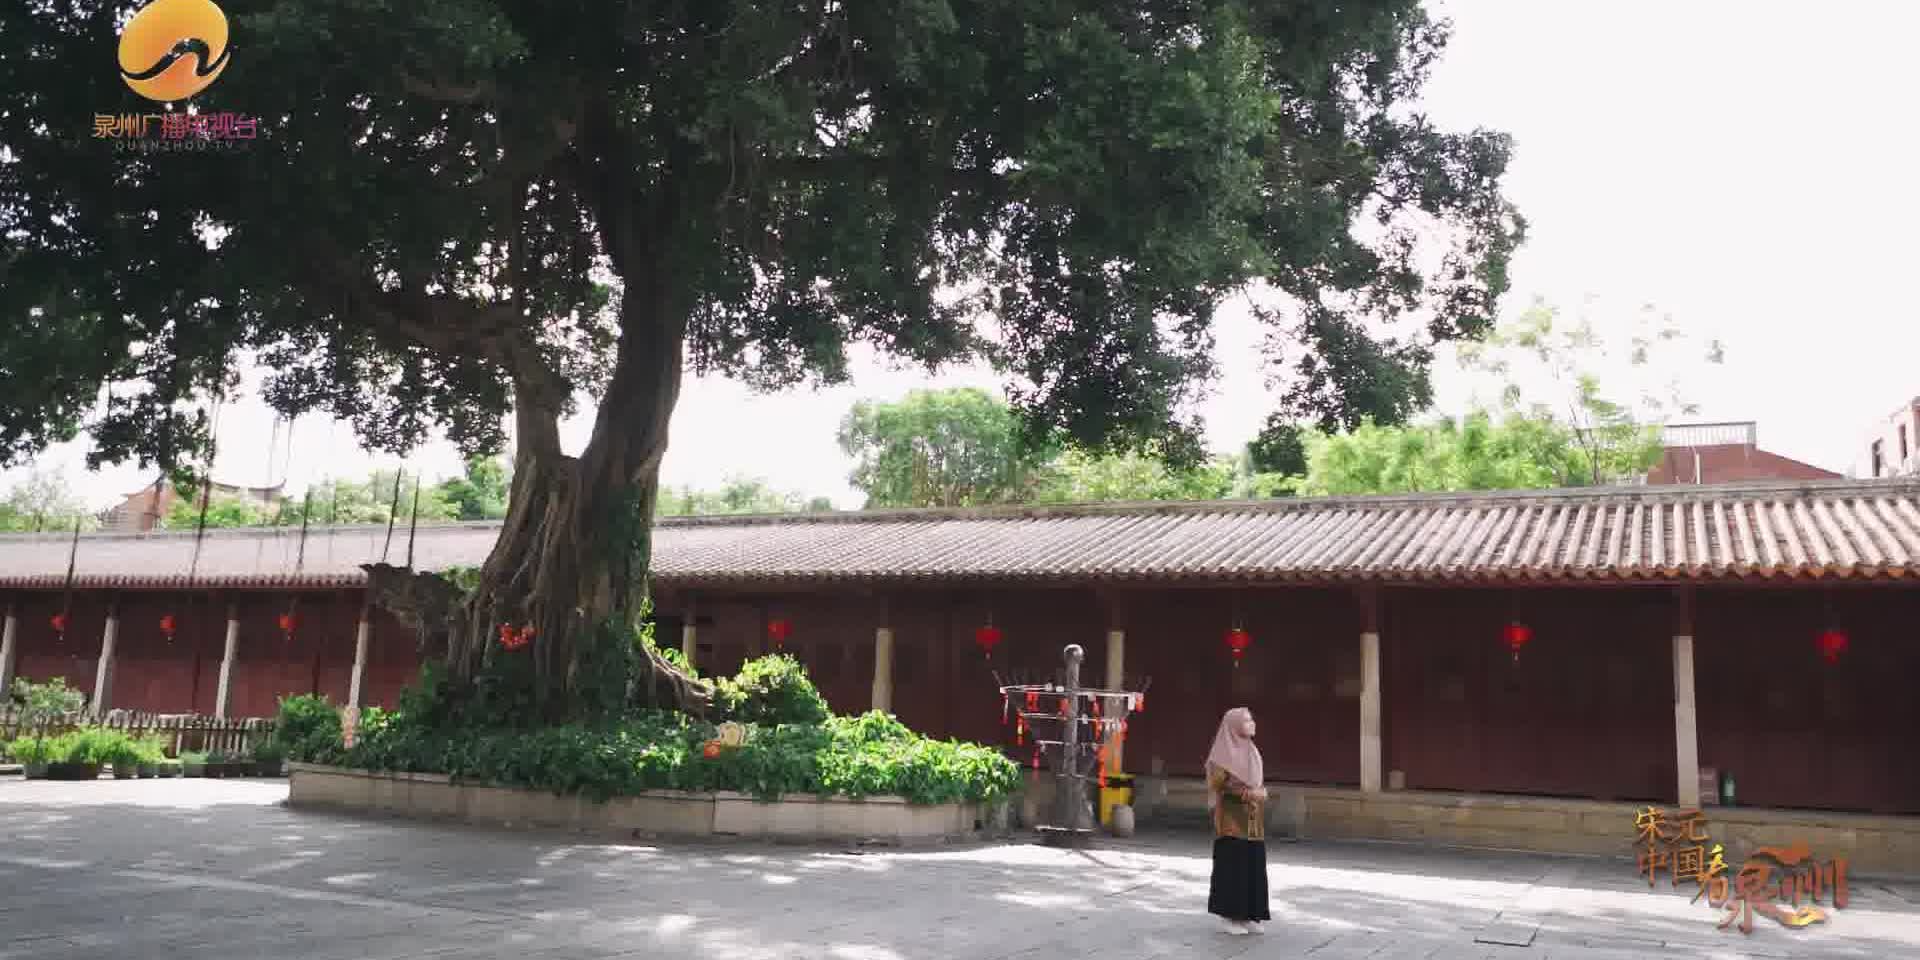 Watch This | 'Feeling power of great thinker': Indonesian girl hears teachings across time in Confucius Temple